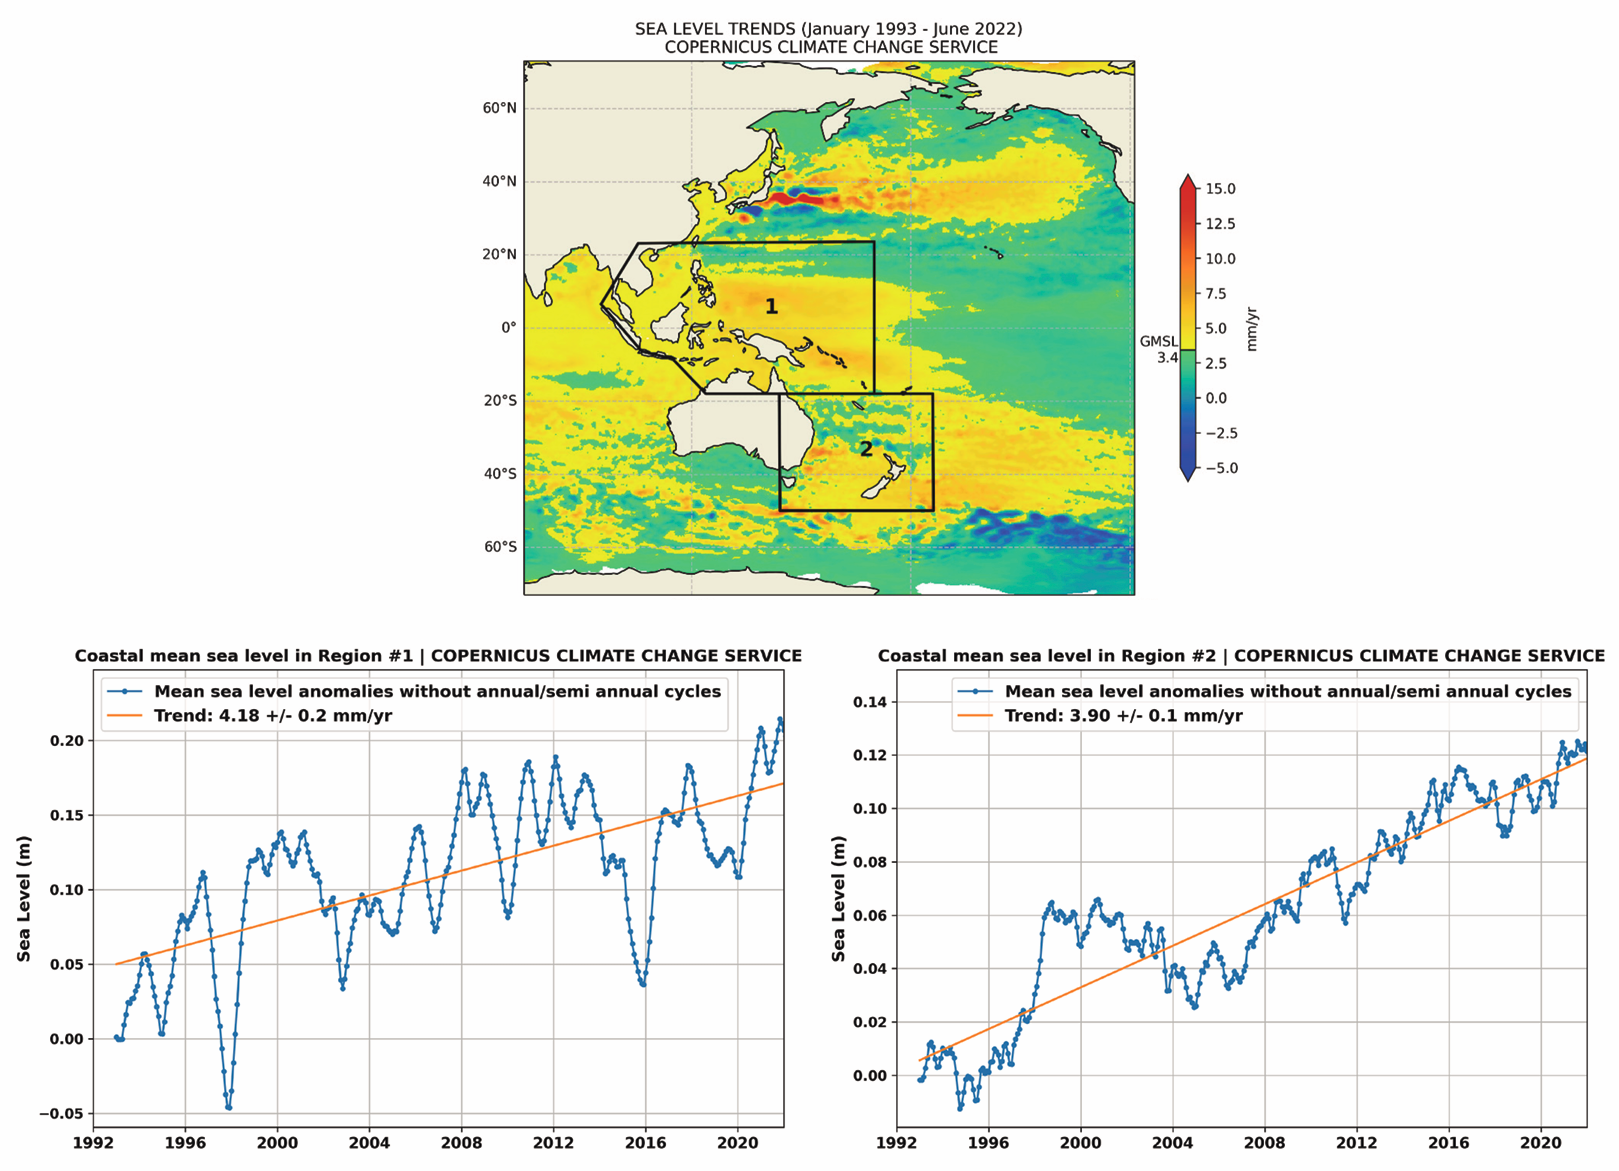 Altimetry-based coastal sea-level time series (m) from January 1993 to June 2022 for the western Pacific and eastern Indian Ocean. The map (top) shows annual mean sea-level trend and location of regions summarized in the plots at the bottom left and right, and the transition from green to yellow colour corresponds to the 3.4 mm per year overall trend in the global mean sea-level rise. The plots (bottom left and right) show mean sea-level anomalies (blue) and estimated trend (orange line) for the South-East Asia and southern Oceania regions, respectively. Source: Copernicus Climate Change Service (C3S) – https://climate.copernicus.eu/sea-level, and Laboratory of Space Geophysical and Oceanographic Studies (LEGOS), France. Graphic: WMO